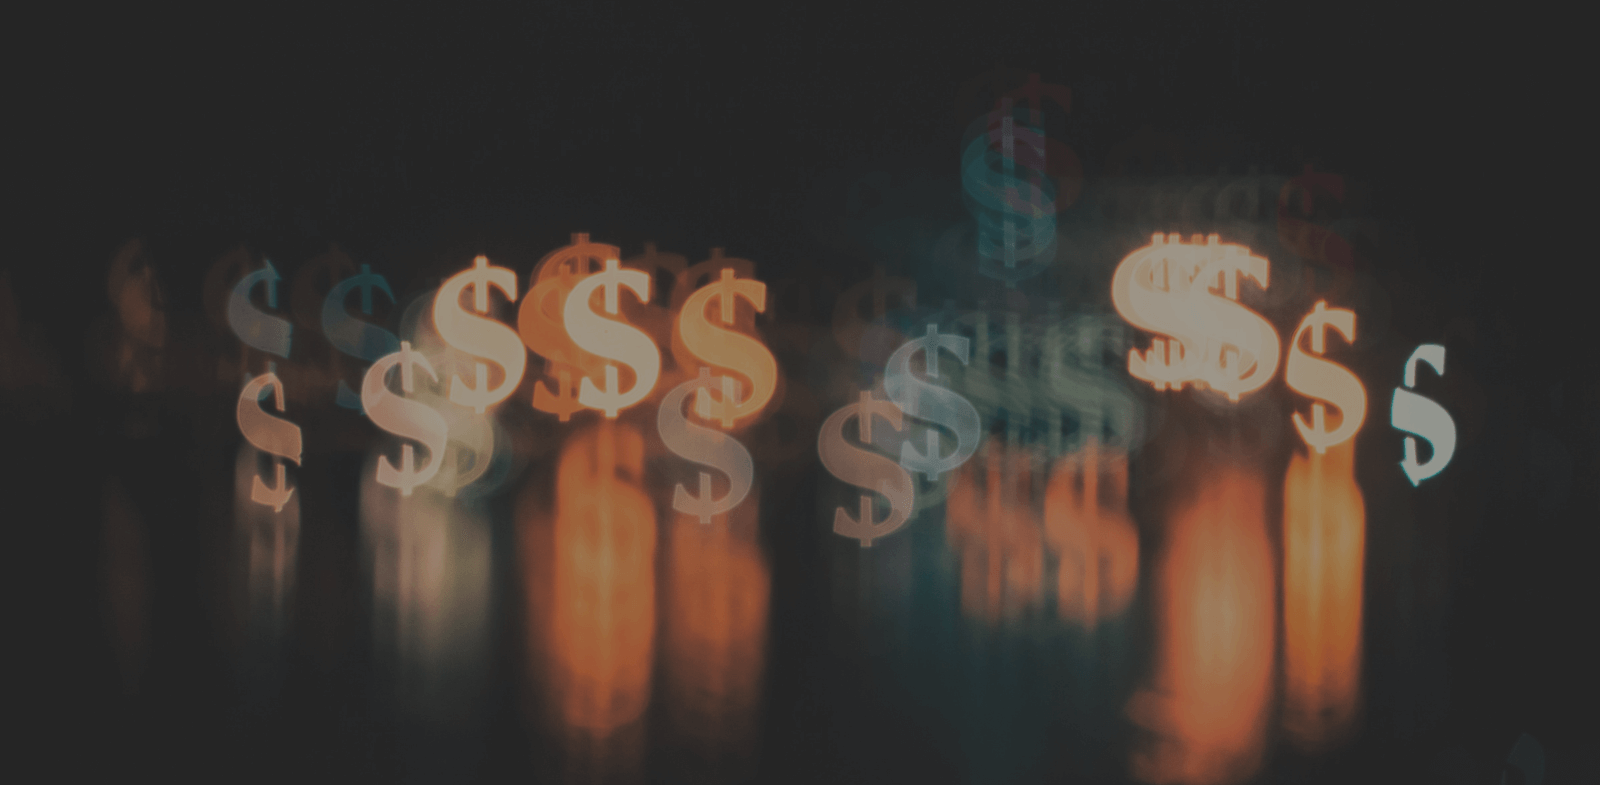 Abstract background of dollar signs